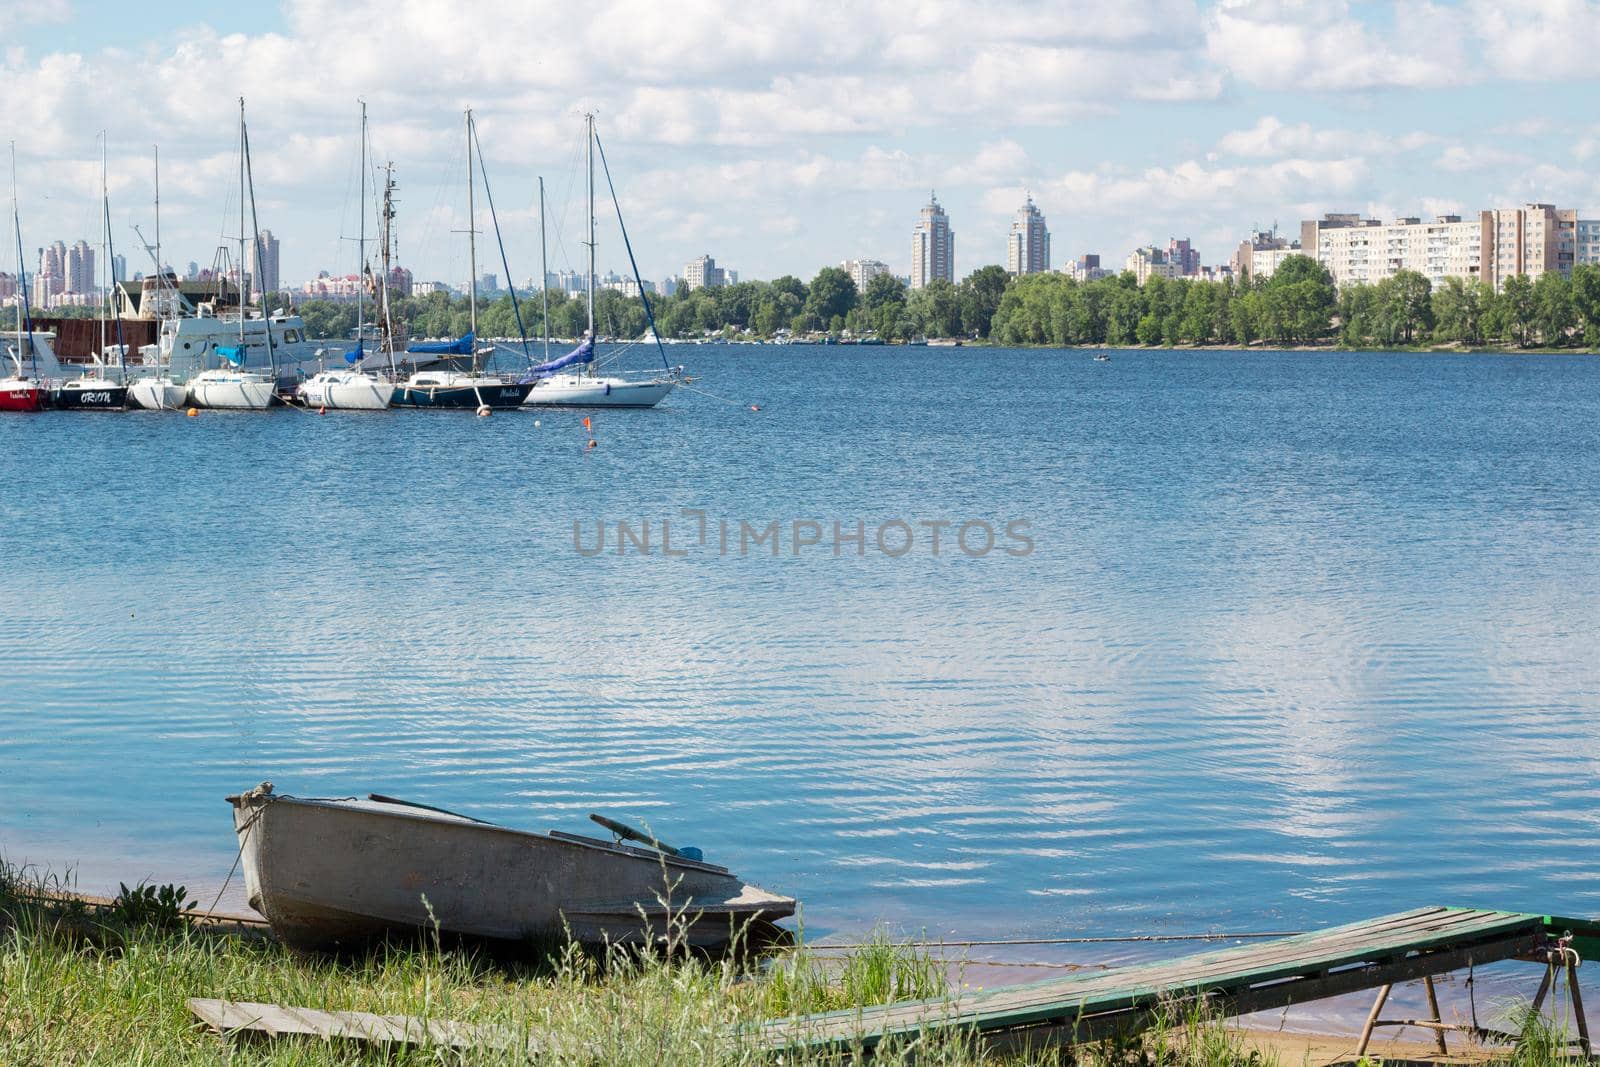 Small fishing boat with paddles standing near marina with sailing yachts and boats on river bank by VeraVerano